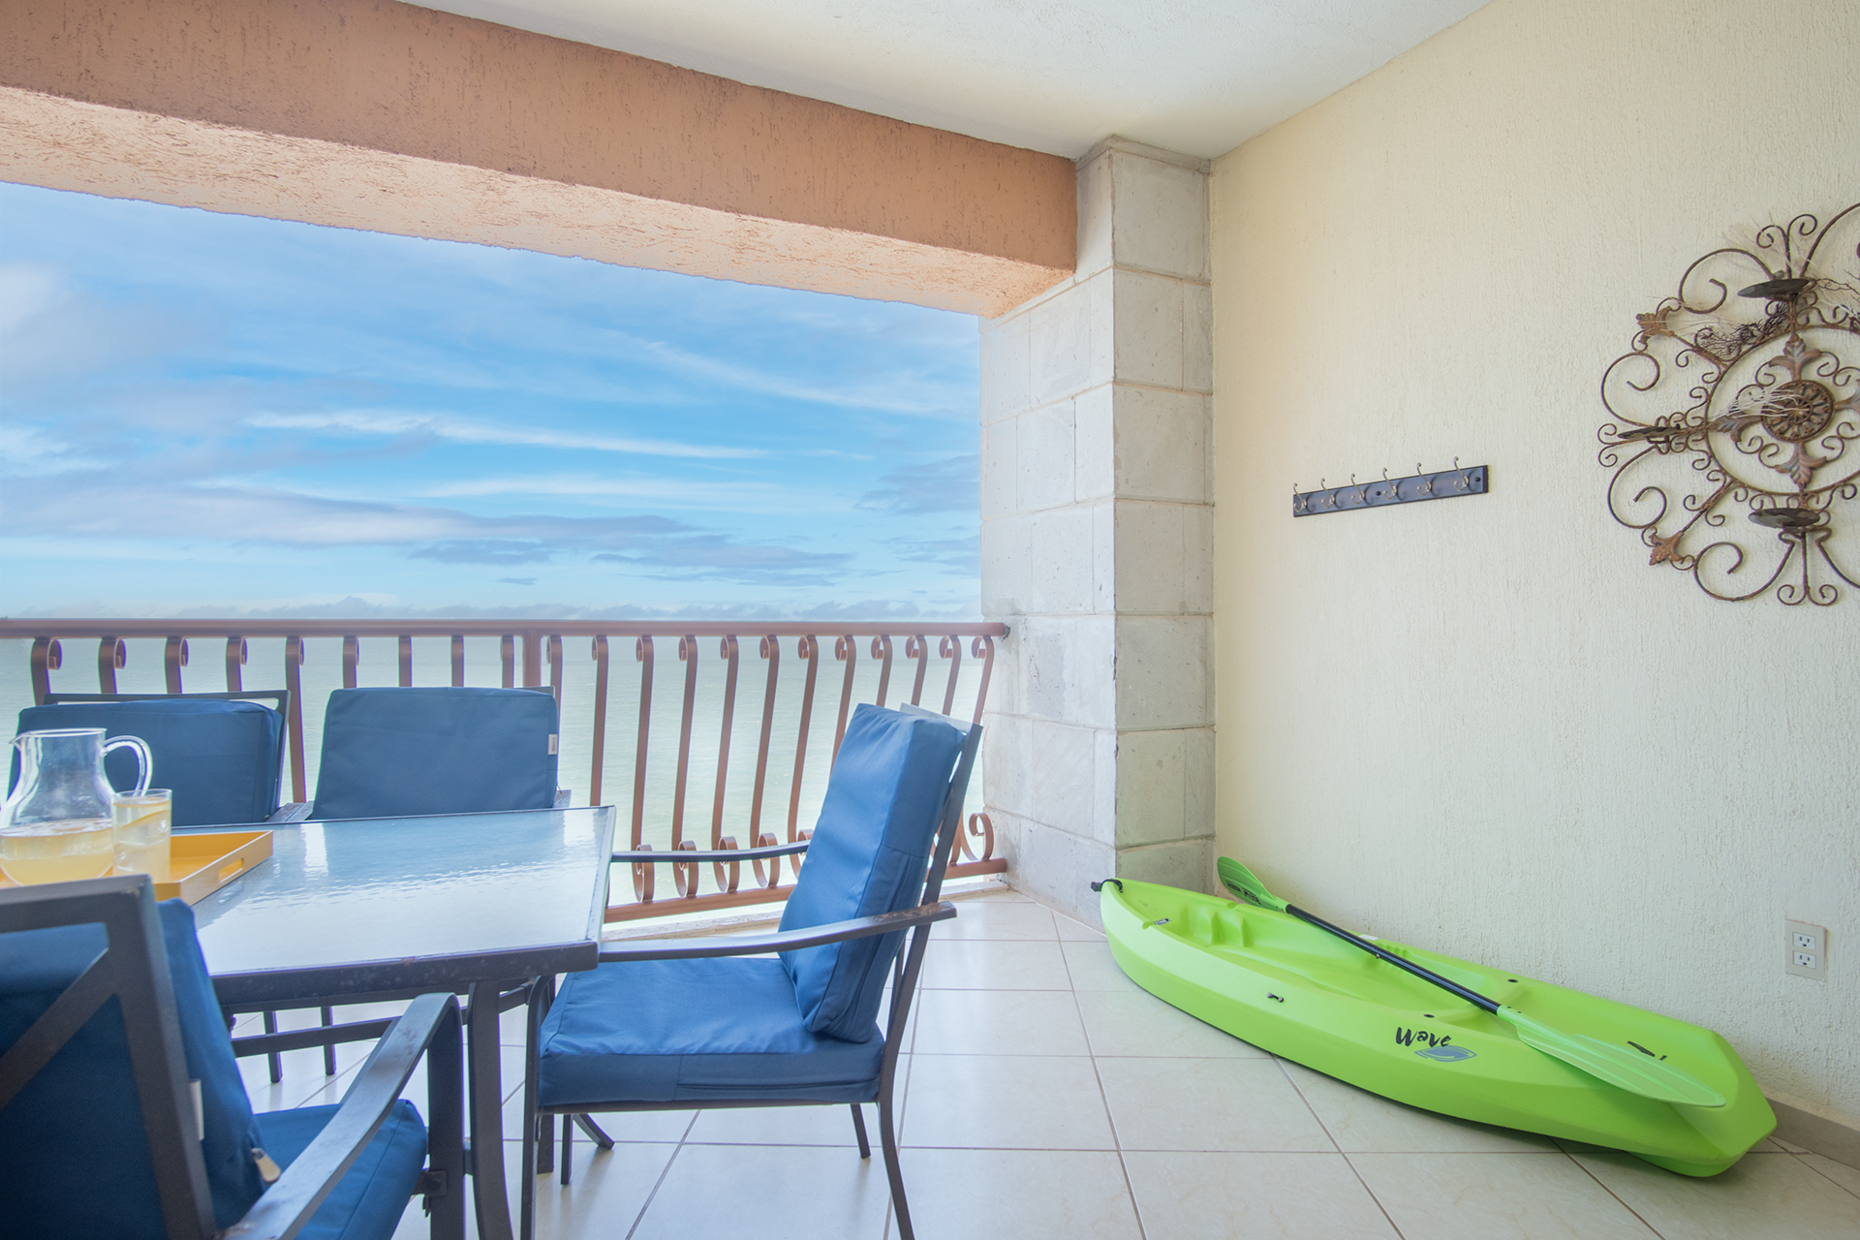 kayak for guests on the patio